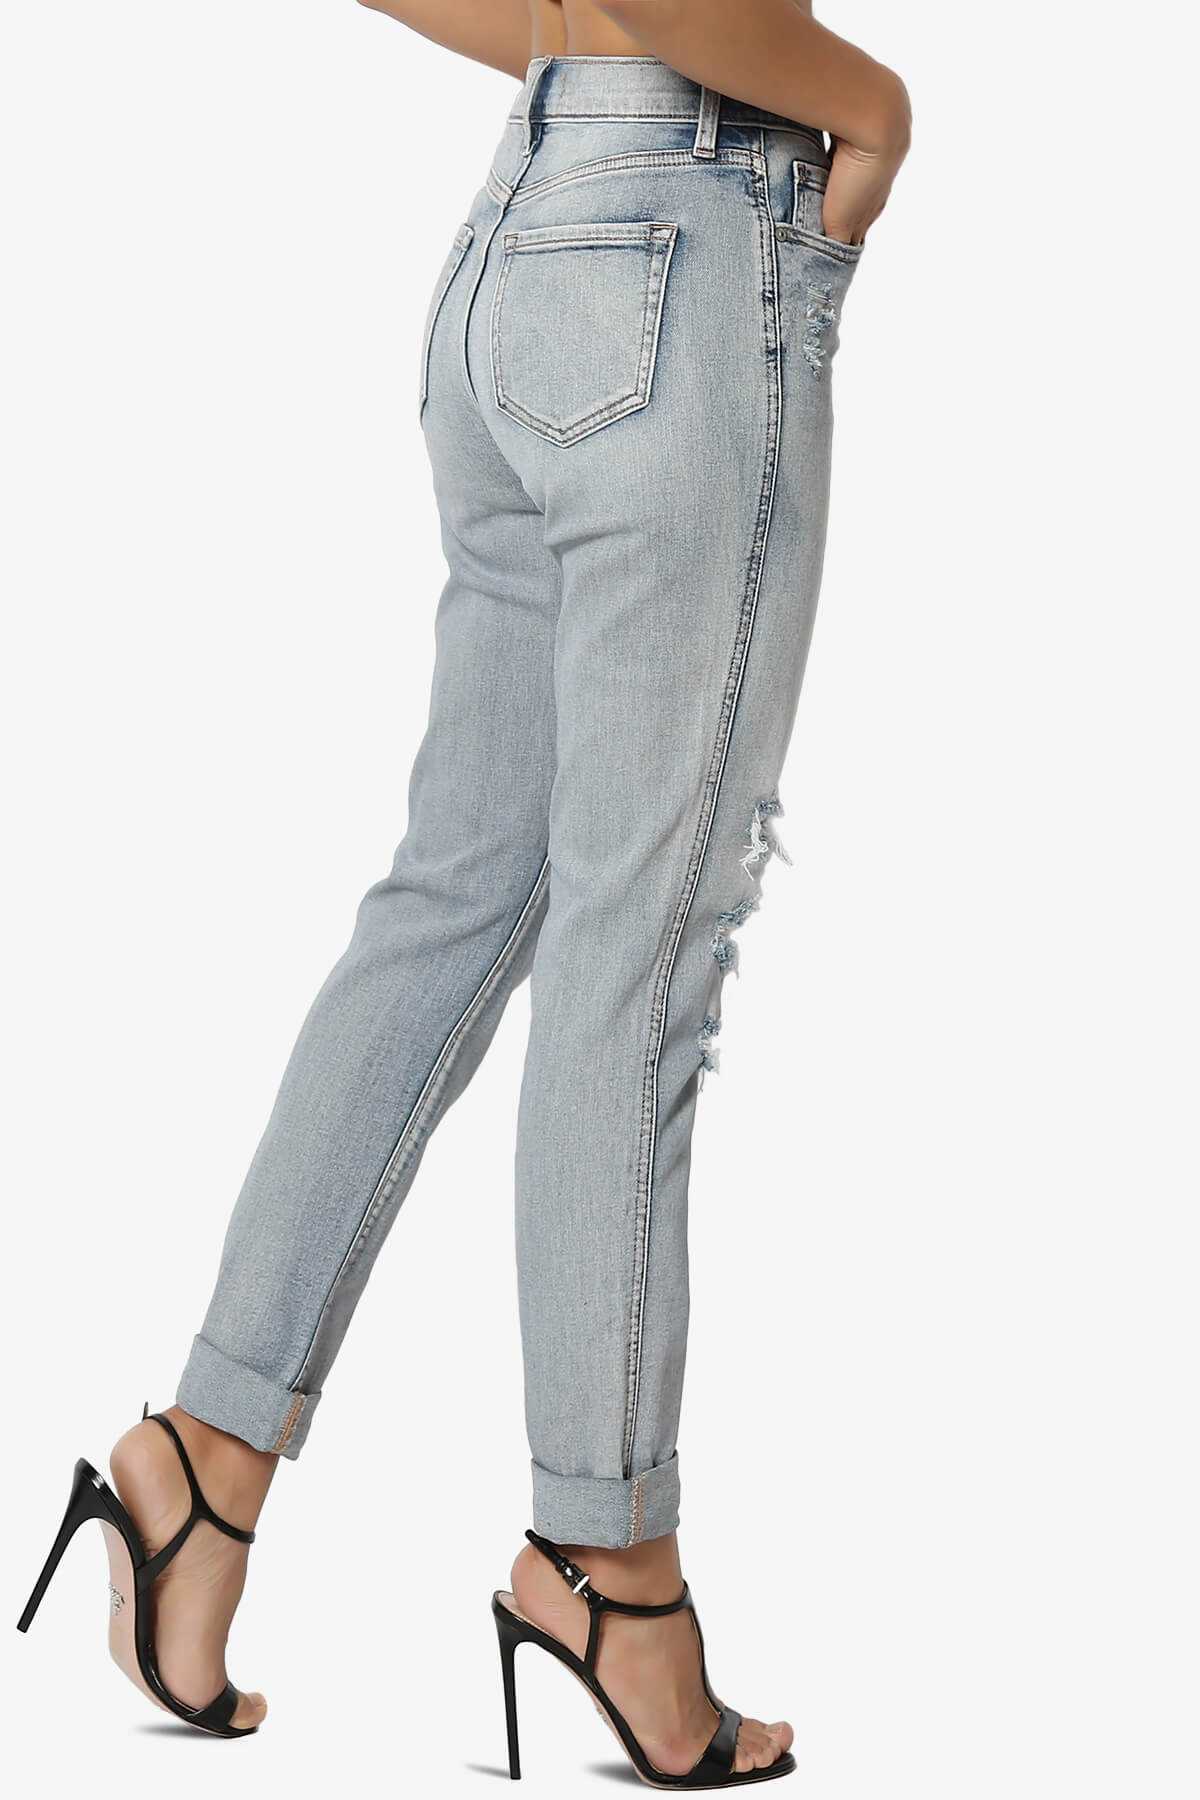 Load image into Gallery viewer, Rocky High Rise Distressed Boyfriend Jeans Supernova LIGHT_4
